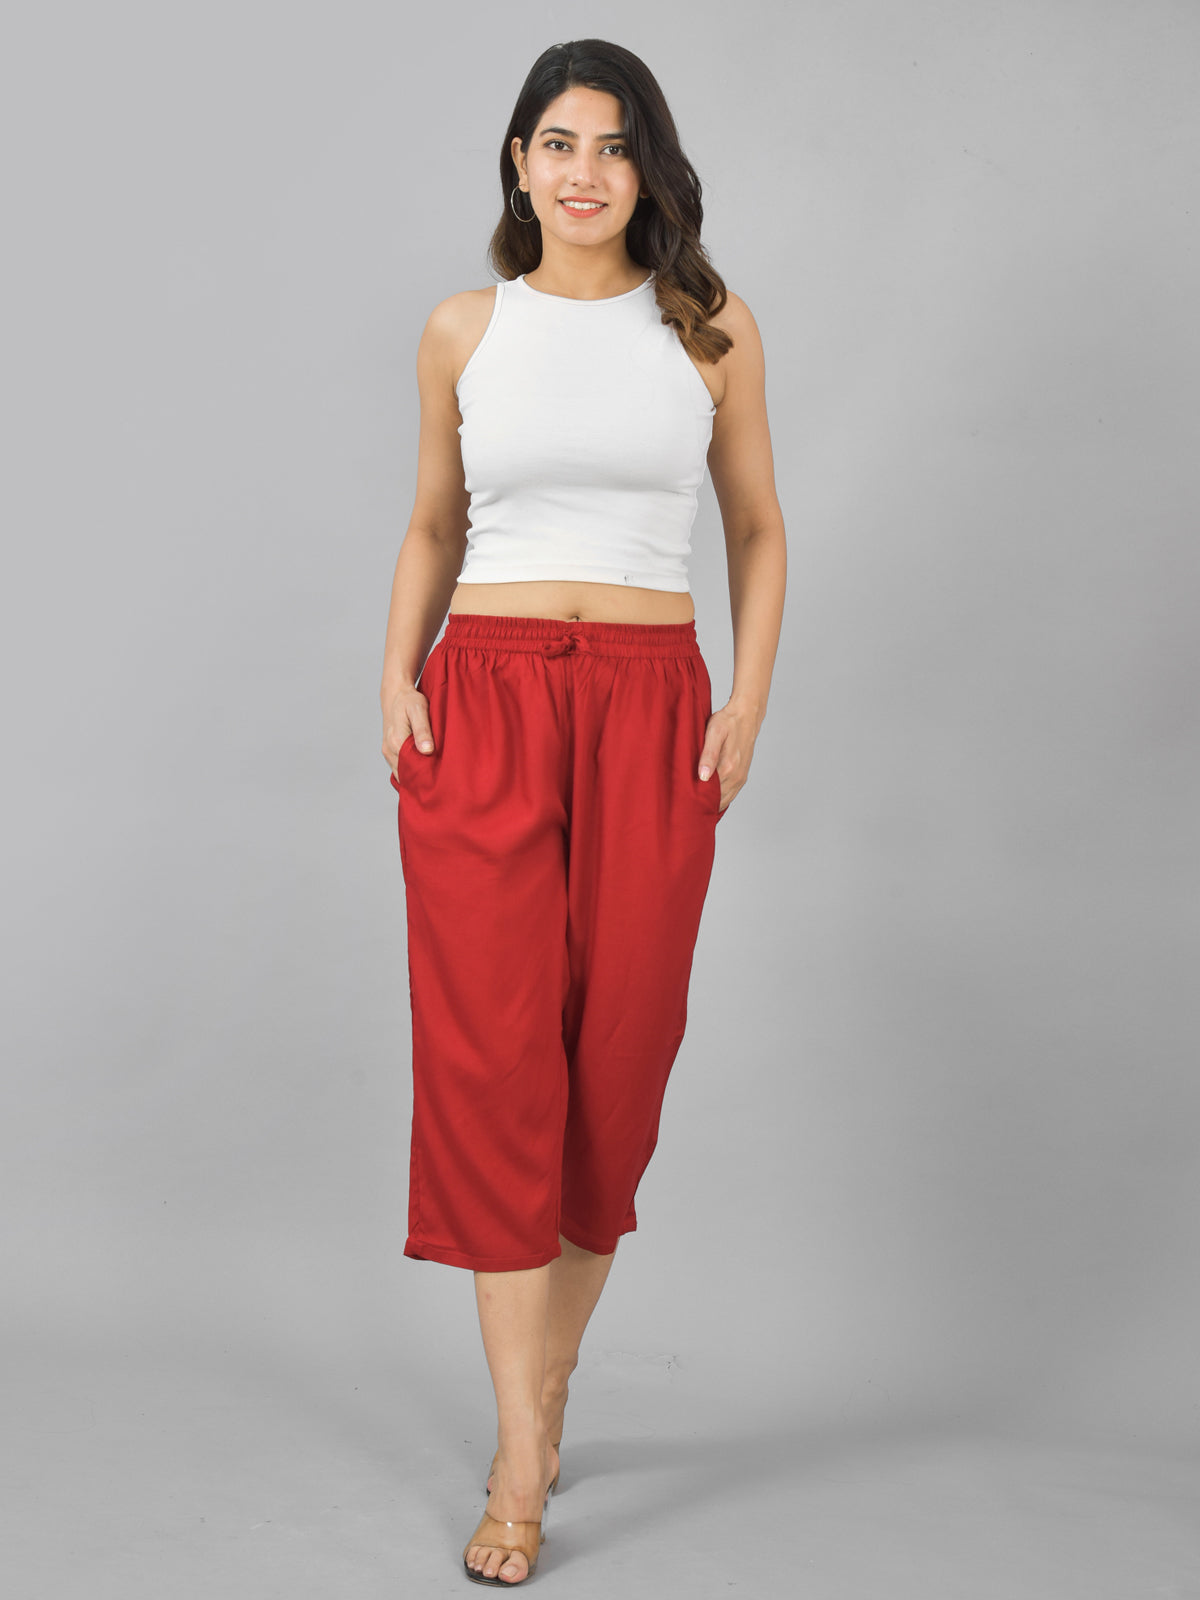 Pack Of 2 Womens Maroon And Wine Calf Length Rayon Culottes Trouser Combo